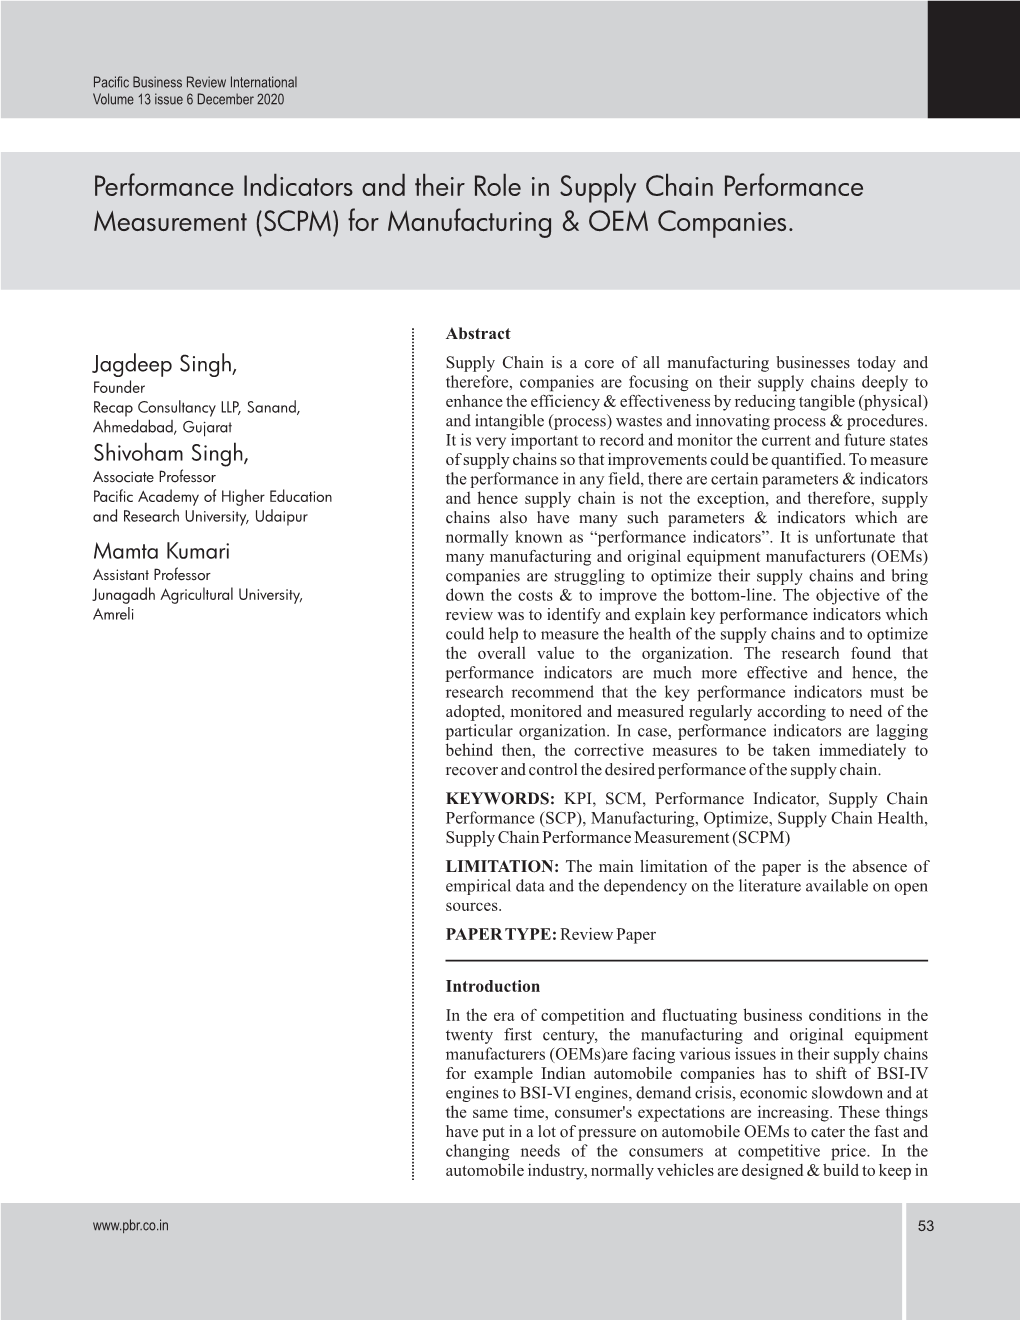 Performance Indicators and Their Role in Supply Chain Performance Measurement (SCPM) for Manufacturing & OEM Companies